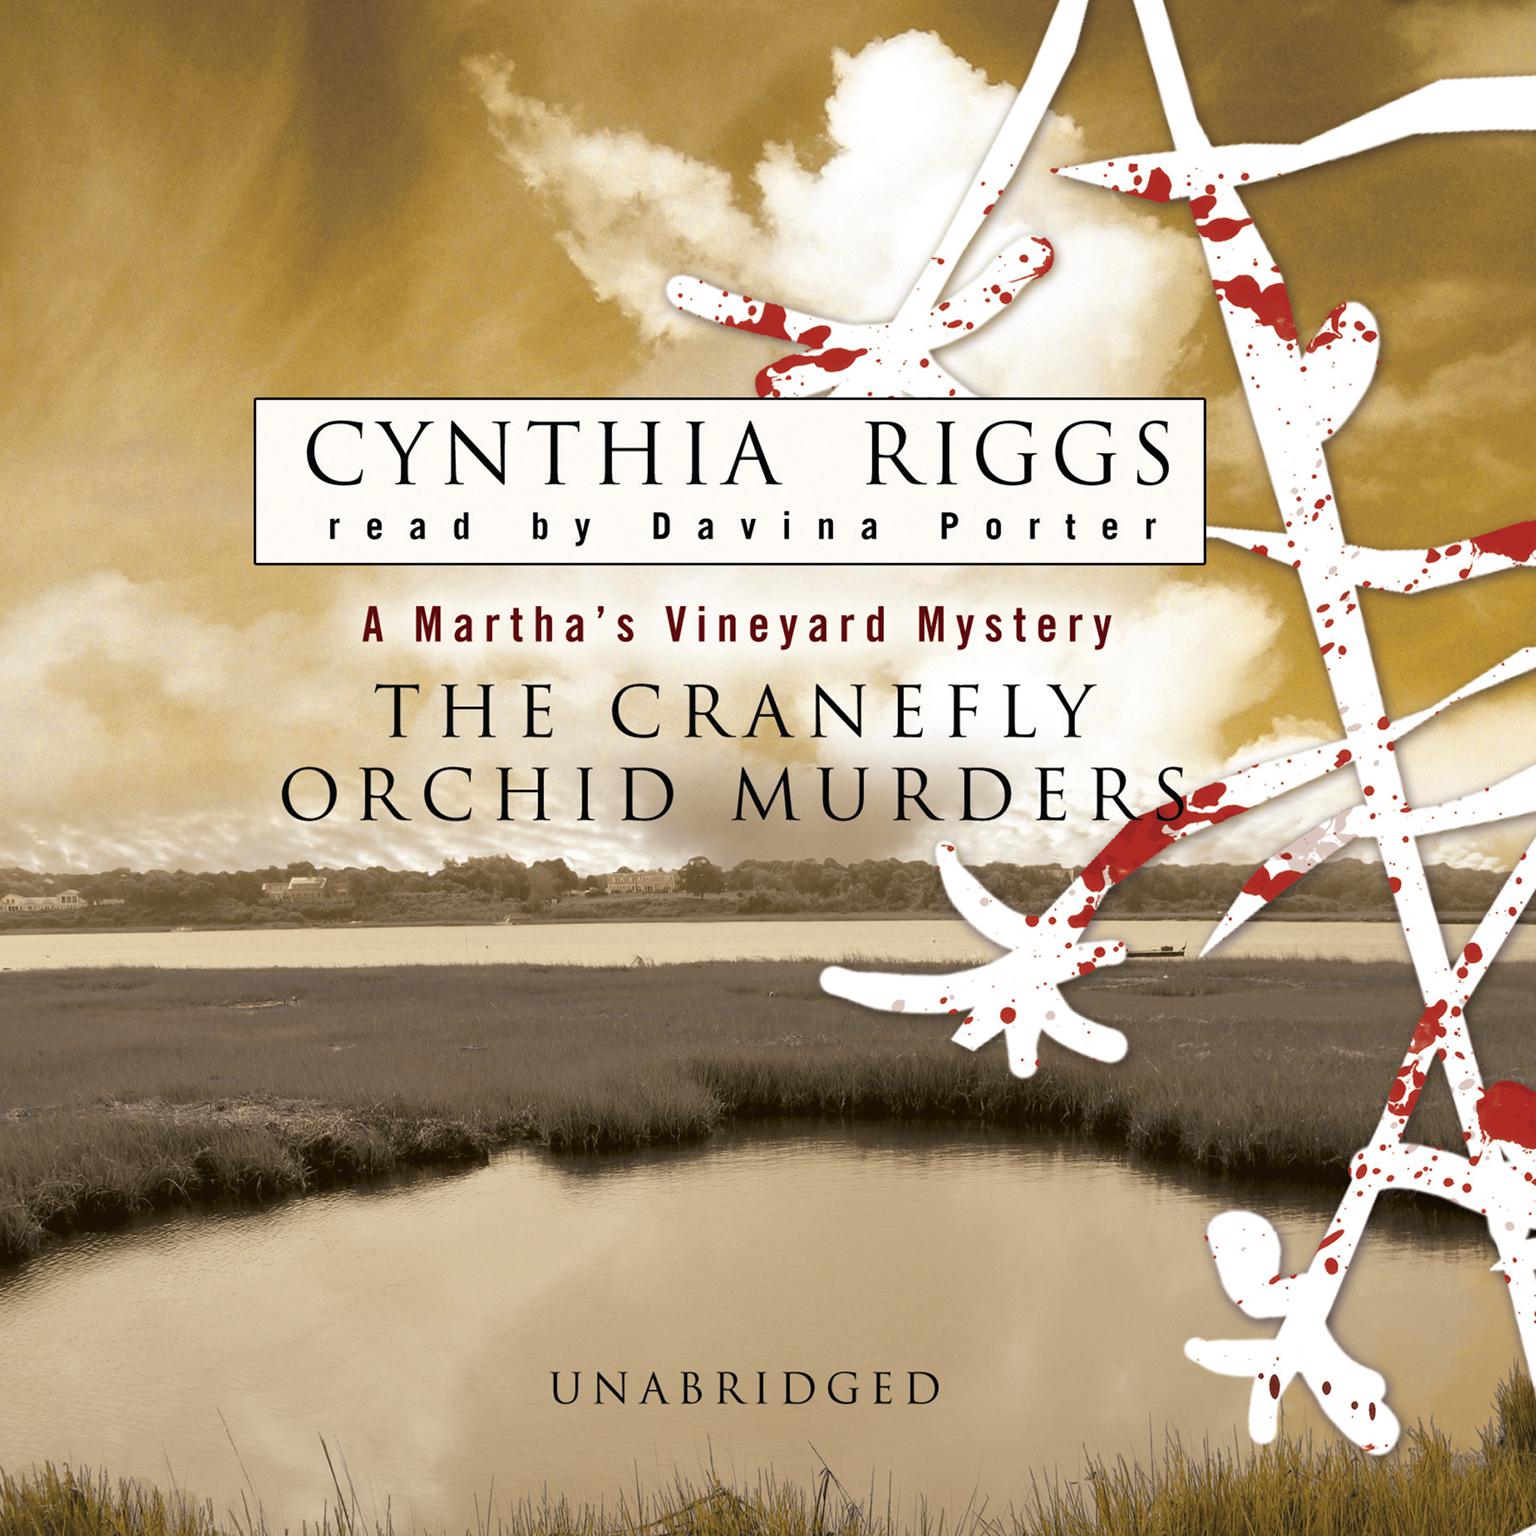 The Cranefly Orchid Murders: A Martha’s Vineyard Mystery Audiobook, by Cynthia Riggs